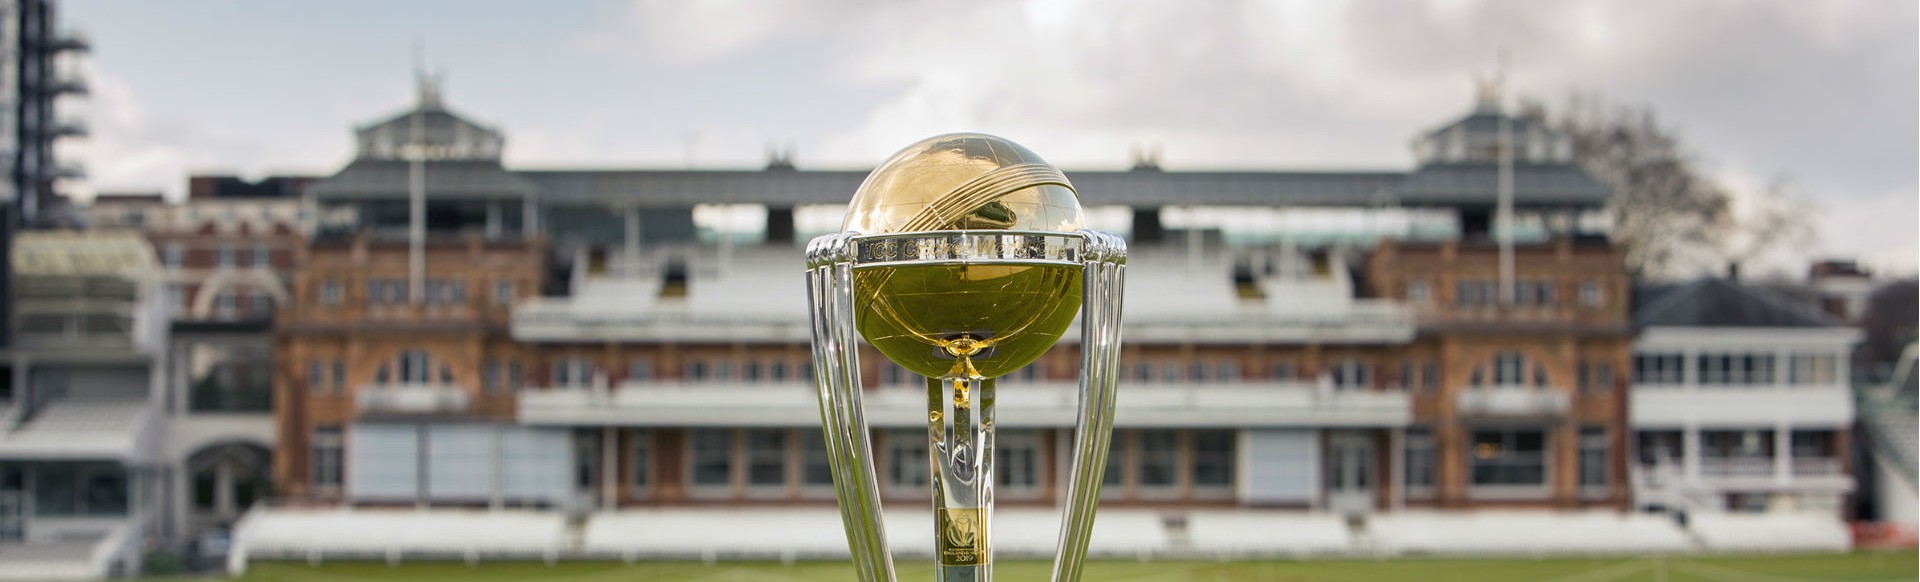 The Cricket World Cup Trophy at Lord's Cricket Ground.